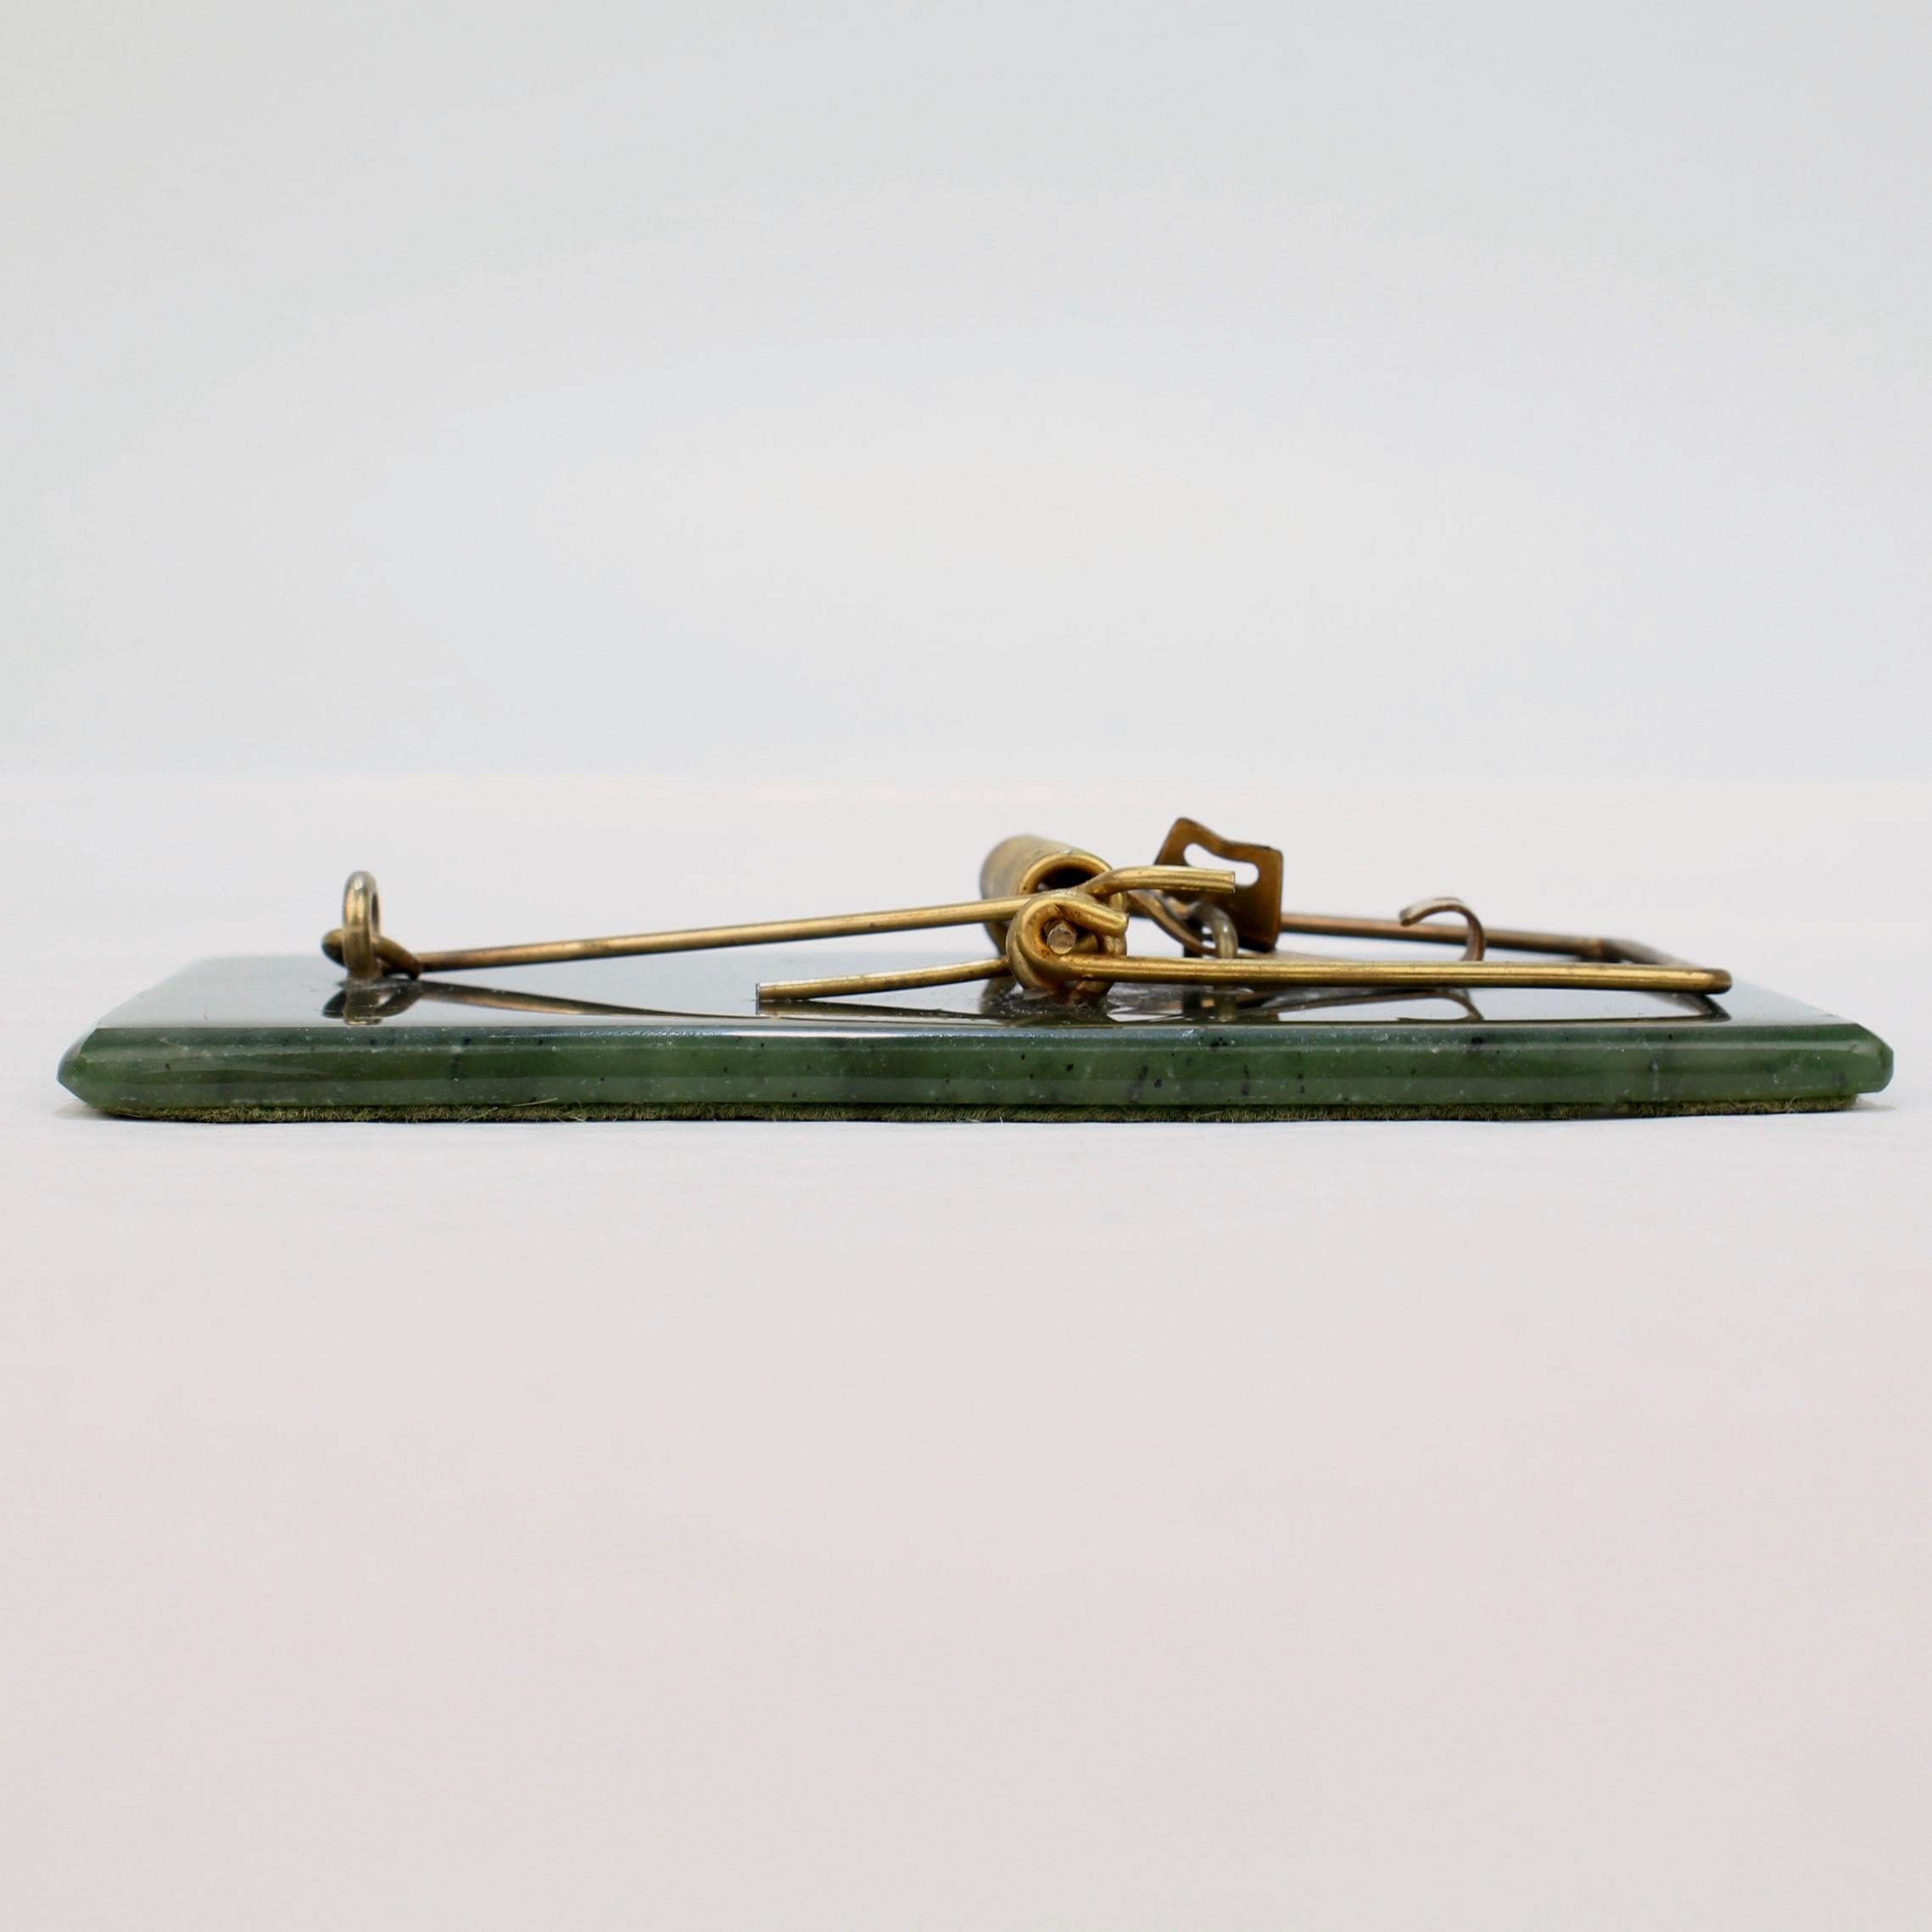 Modern Whimsical Jade Gemstone and Gold-Plated Mouse Trap Sculpture or Desk Paper Clip